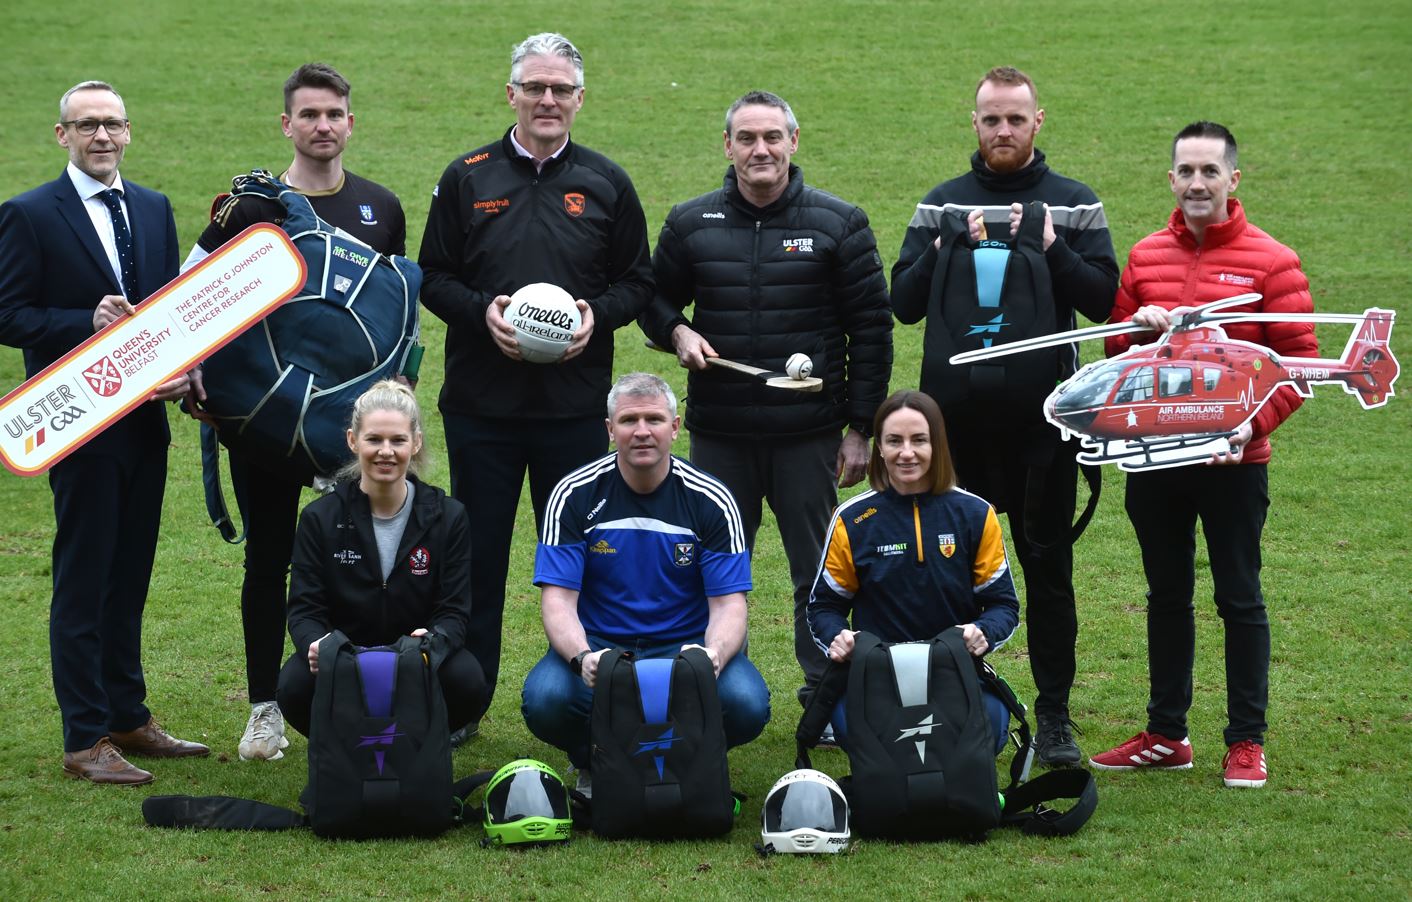 With Only 4 more days to go… Excitement is building for Ulster GAA charity skydive